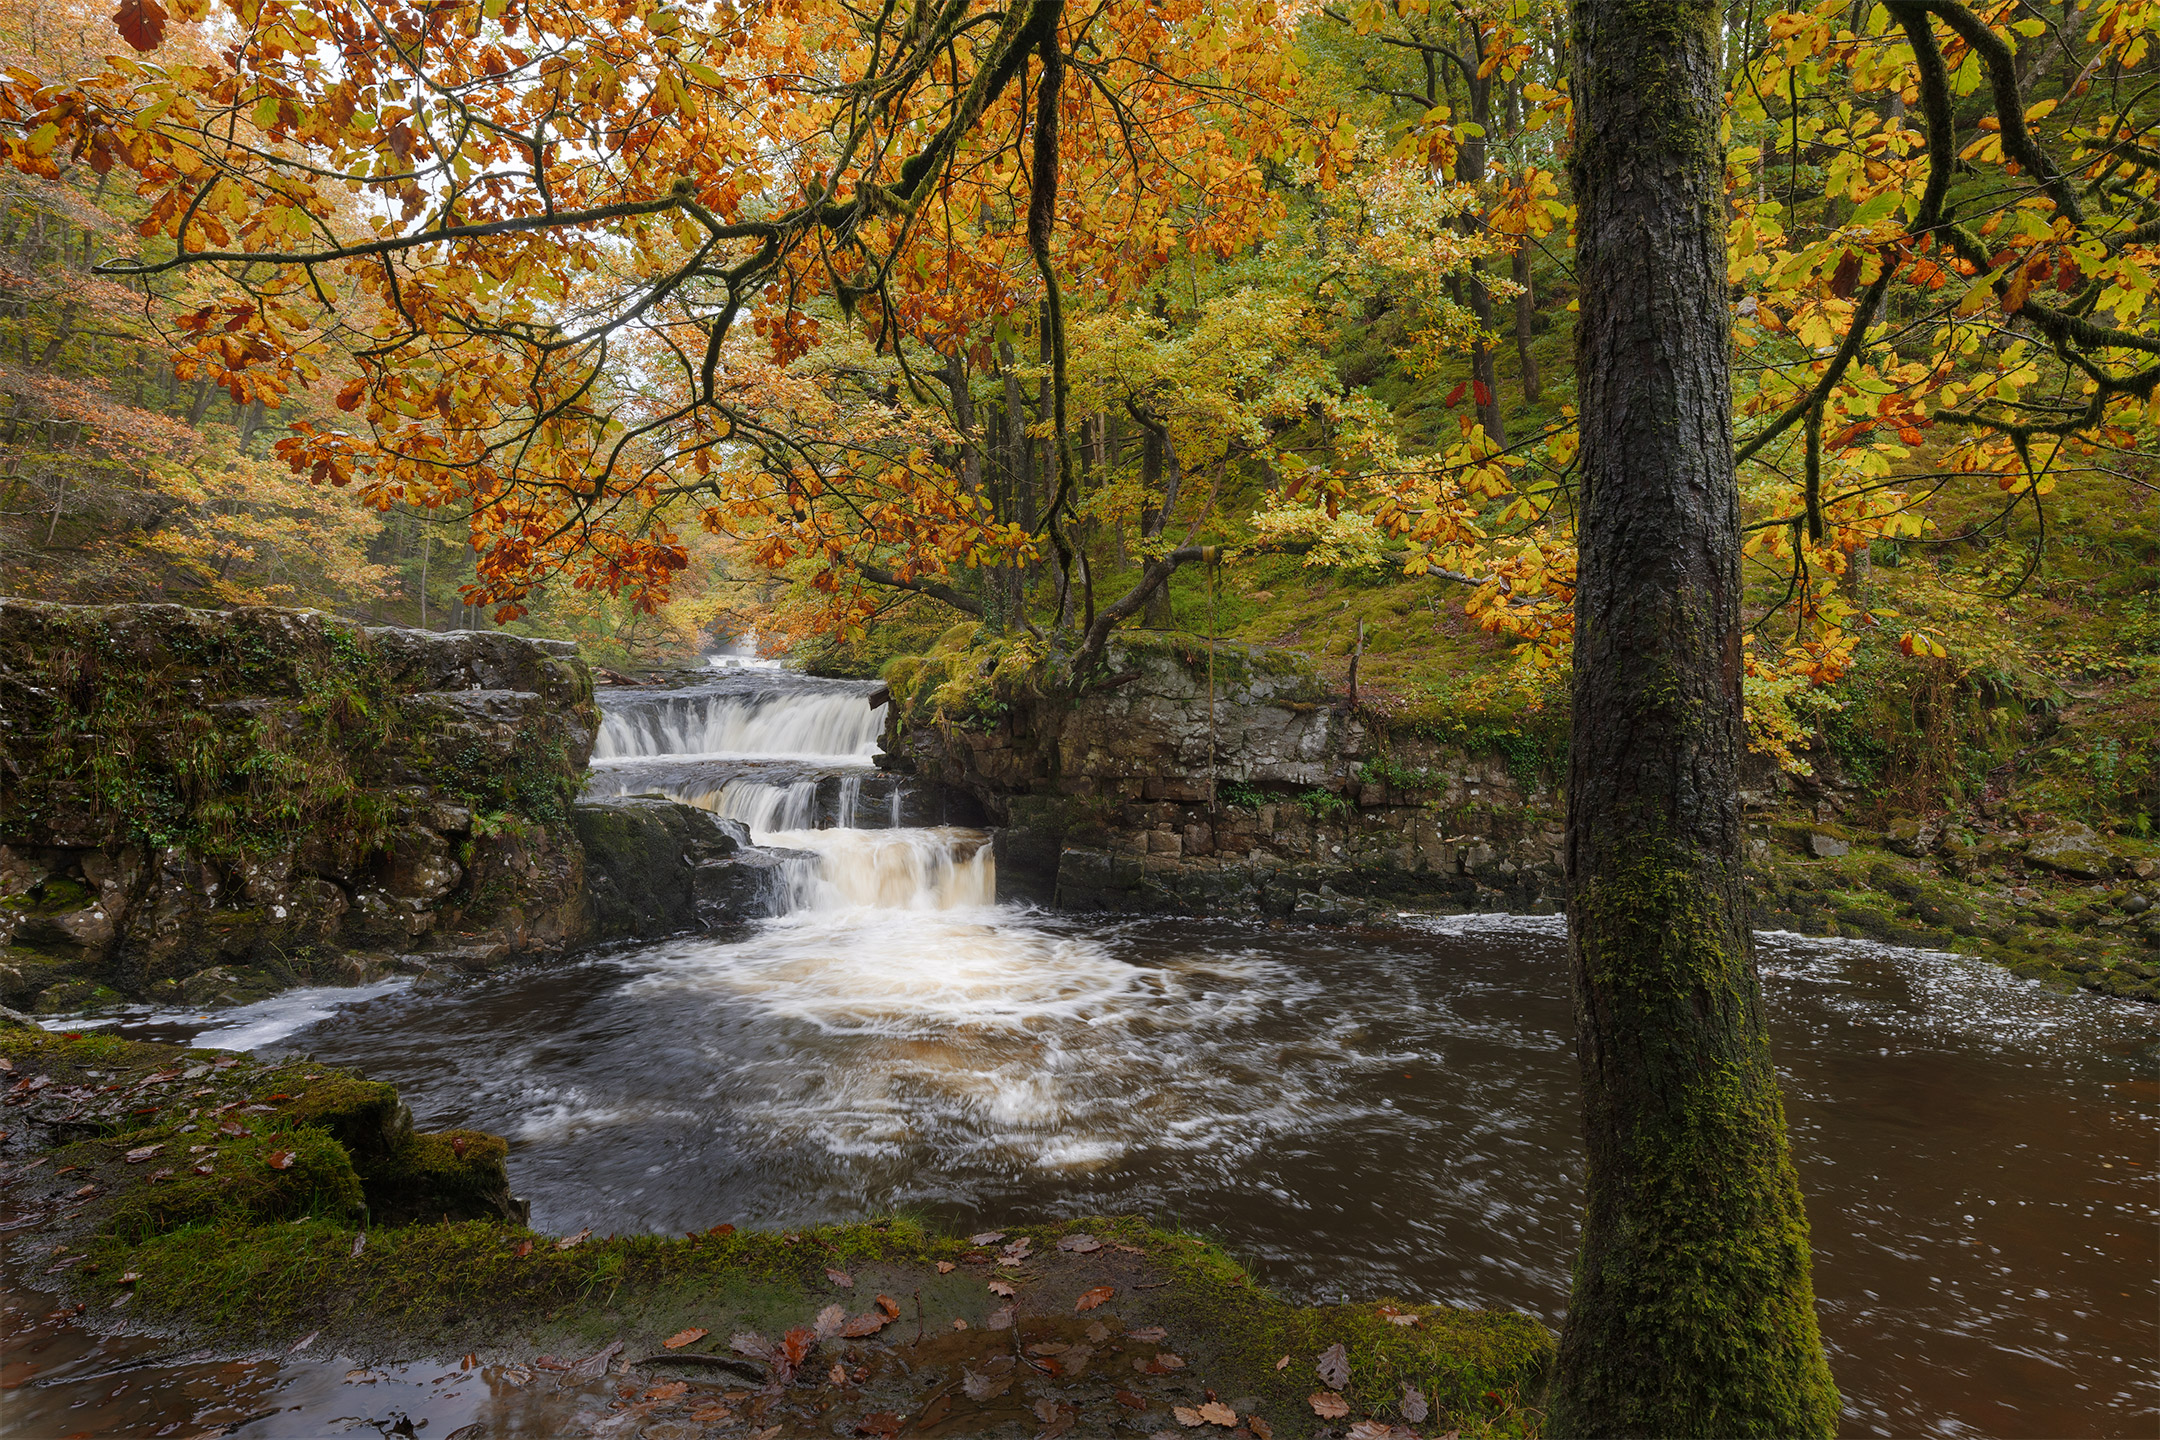 Sgwd-y-Bedol cascades under autumn trees in the Brecon Beacons, Wales